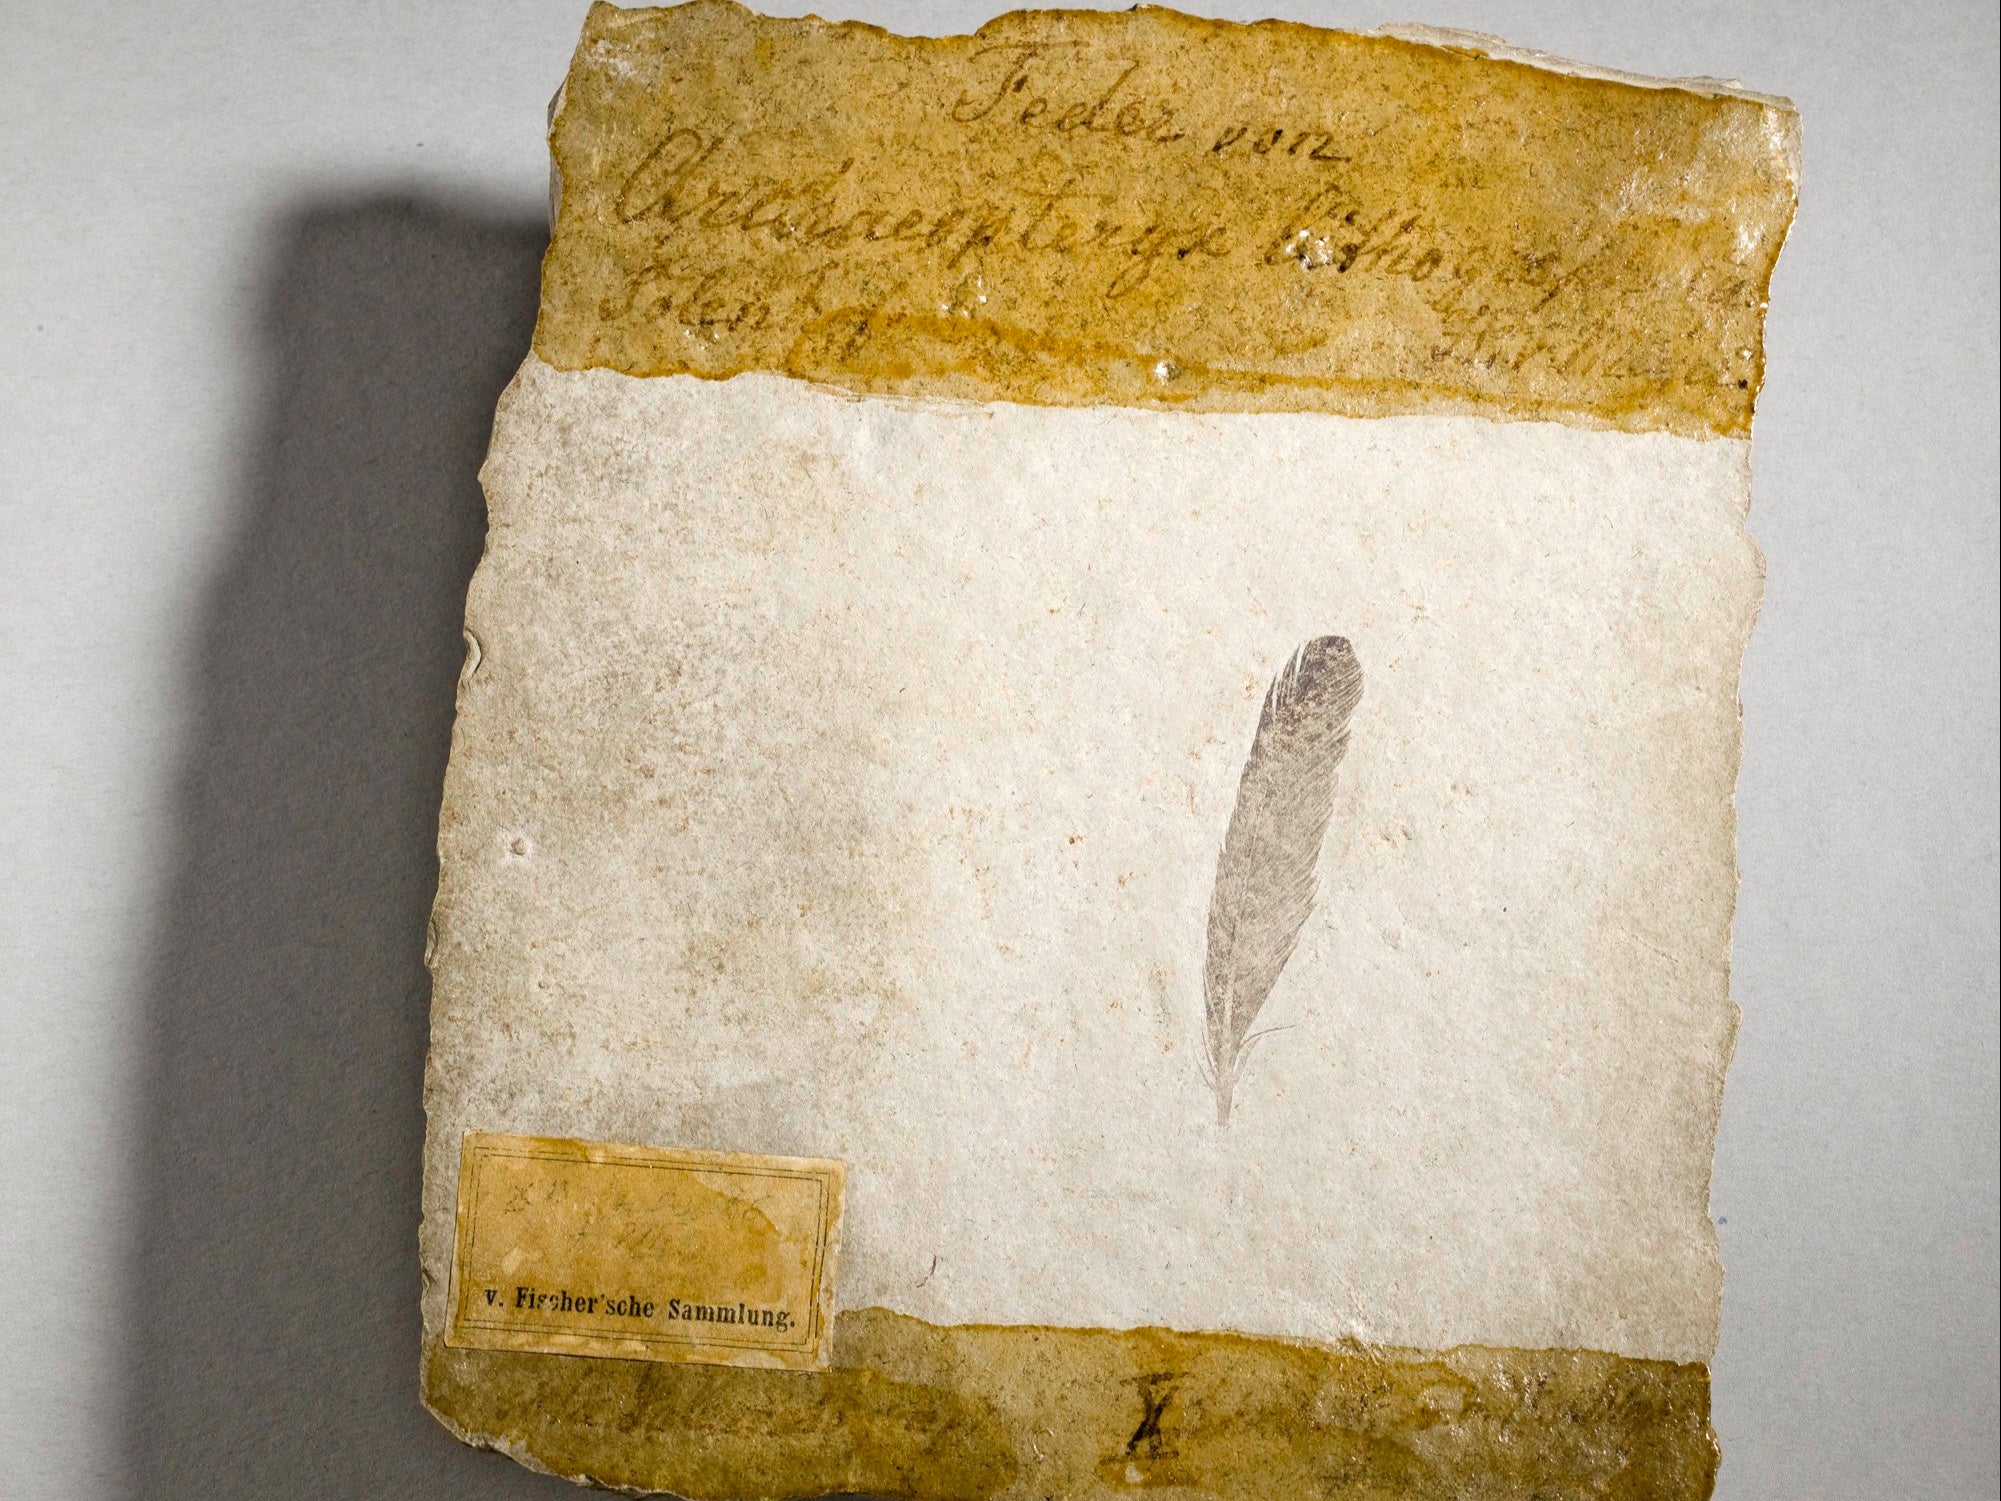 The controversial 150 million-year-old fossil feather, housed at the Museum für Naturkunde in Berlin, Germany. The name "Archaeopteryx lithographica" was coined and assigned to this fossil on 30 September 1861.